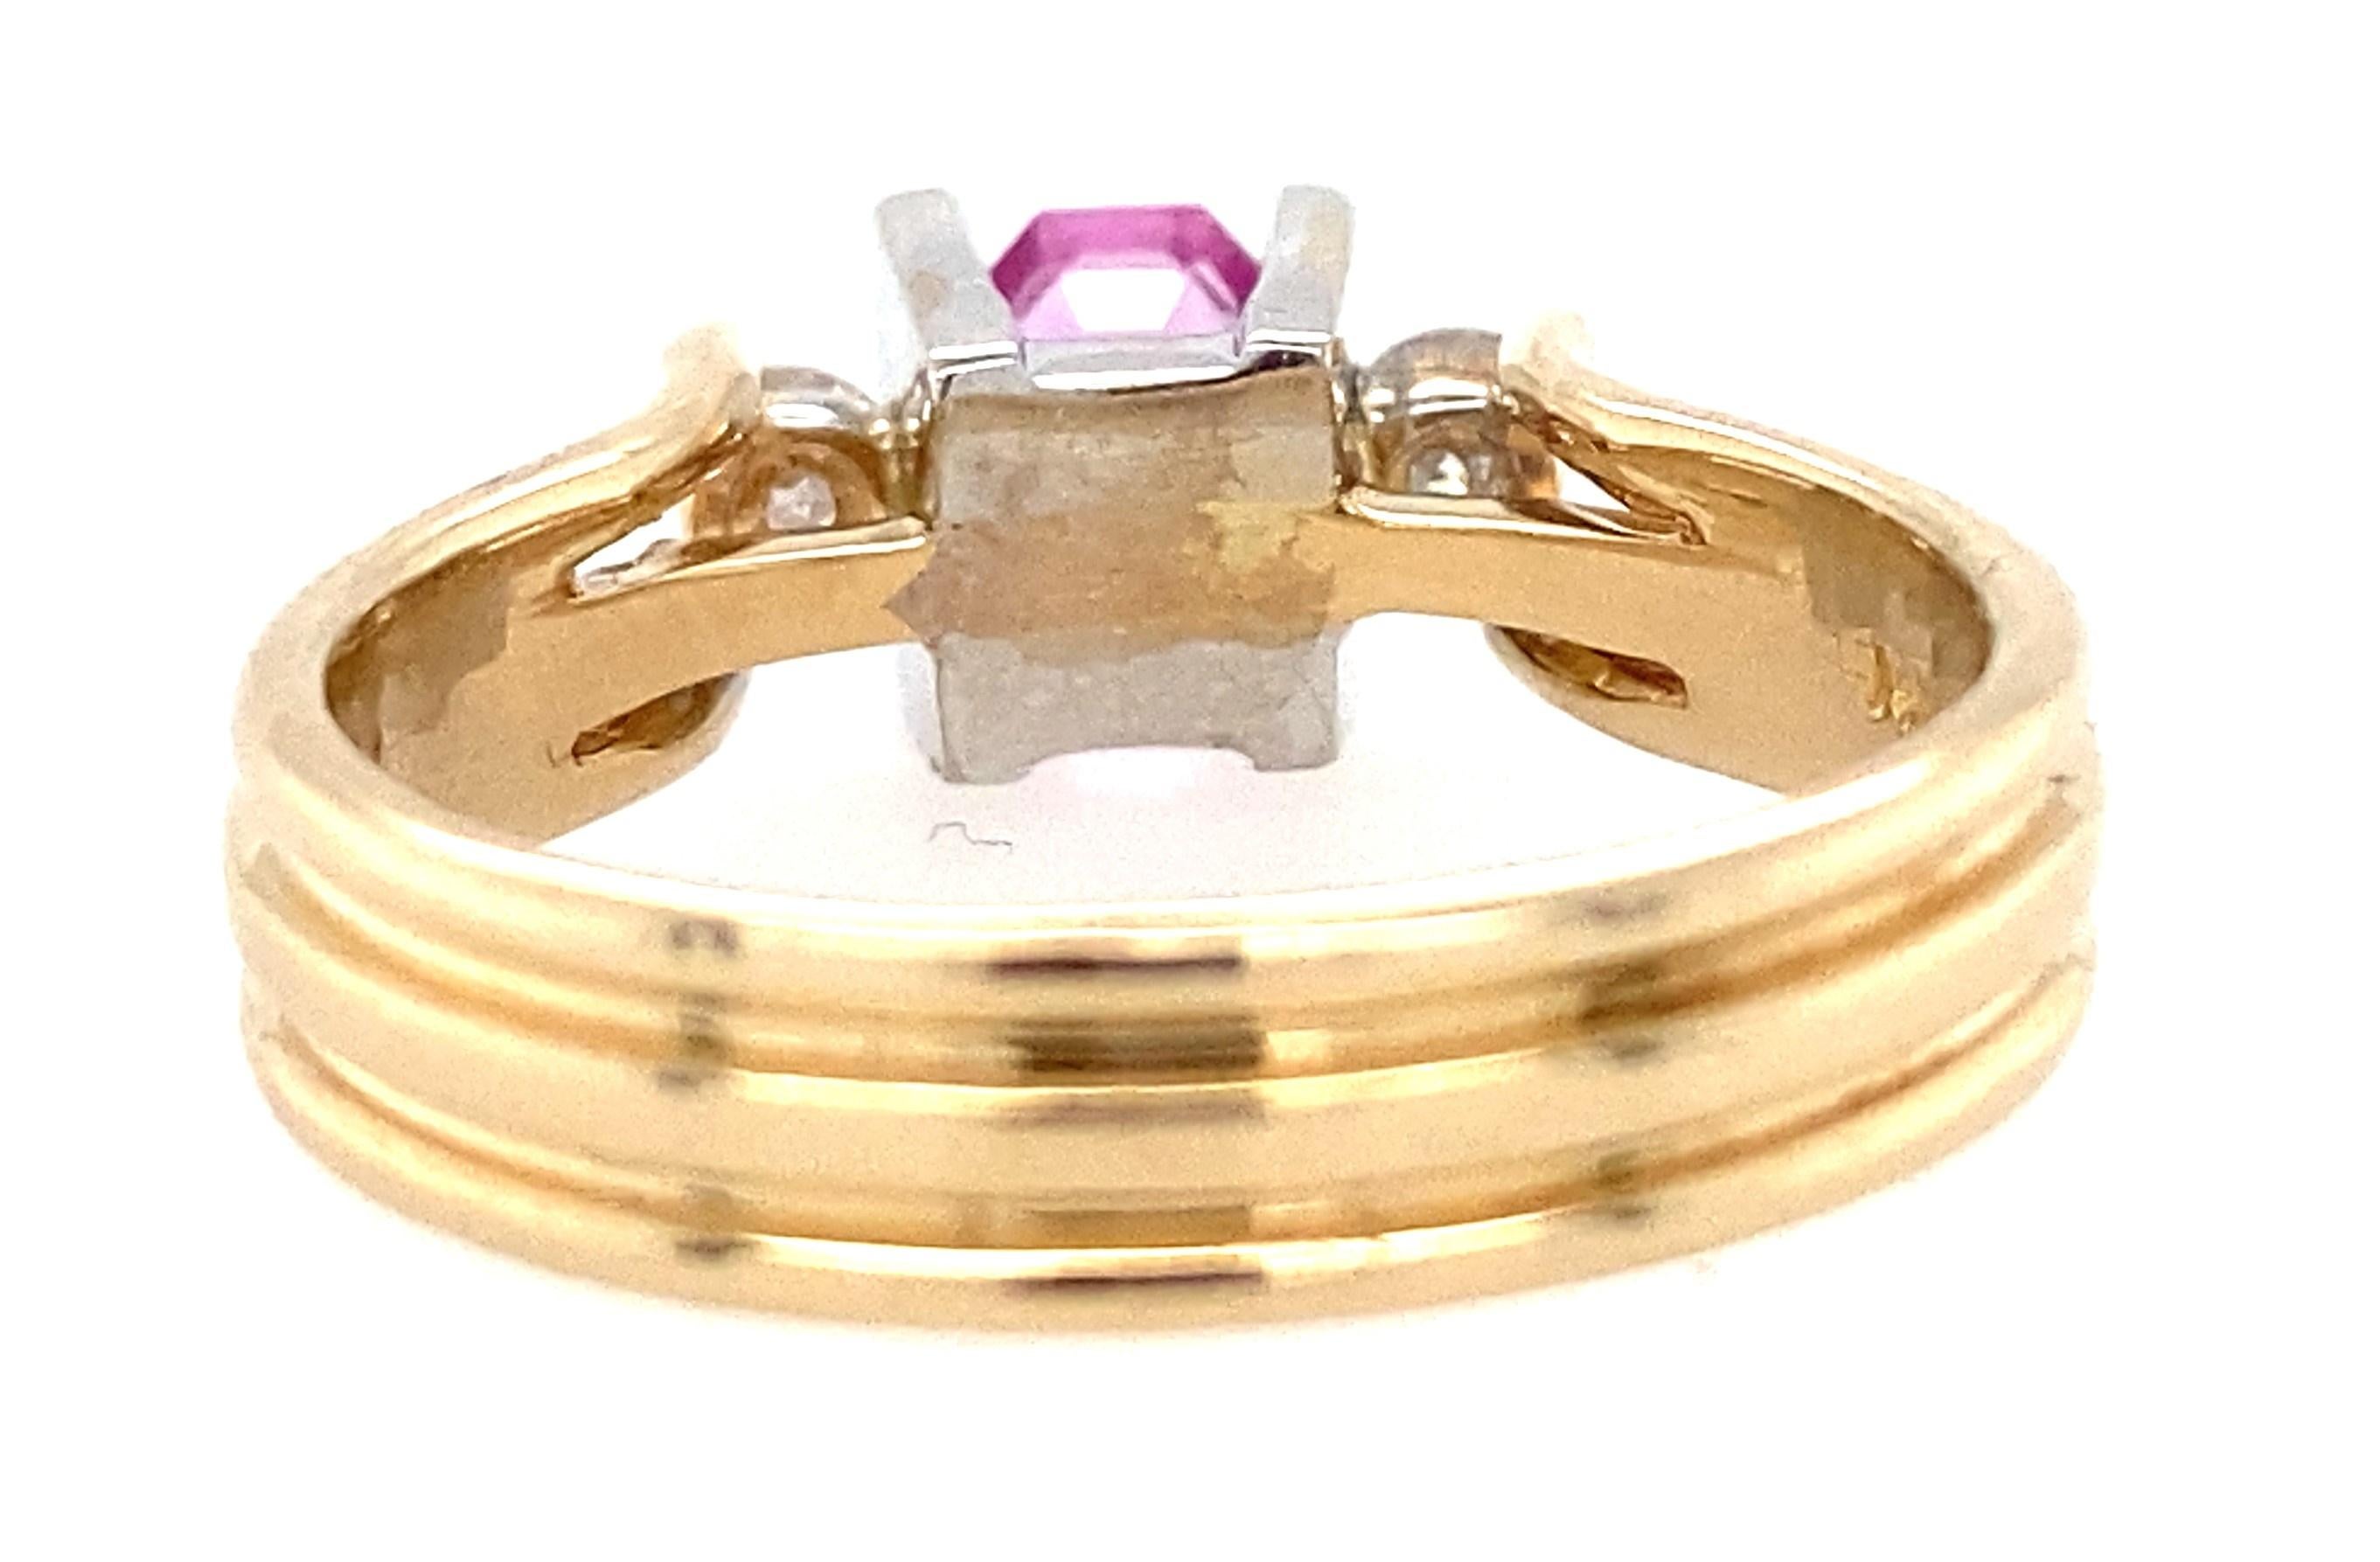 Fresh and architectural, this modern two-tone gold set with a beautiful 0.54ct emerald-cut purplish pink sapphire, accented with 0.16tcw I-J Color, I1-I2 clarity diamonds. It measures 1/4